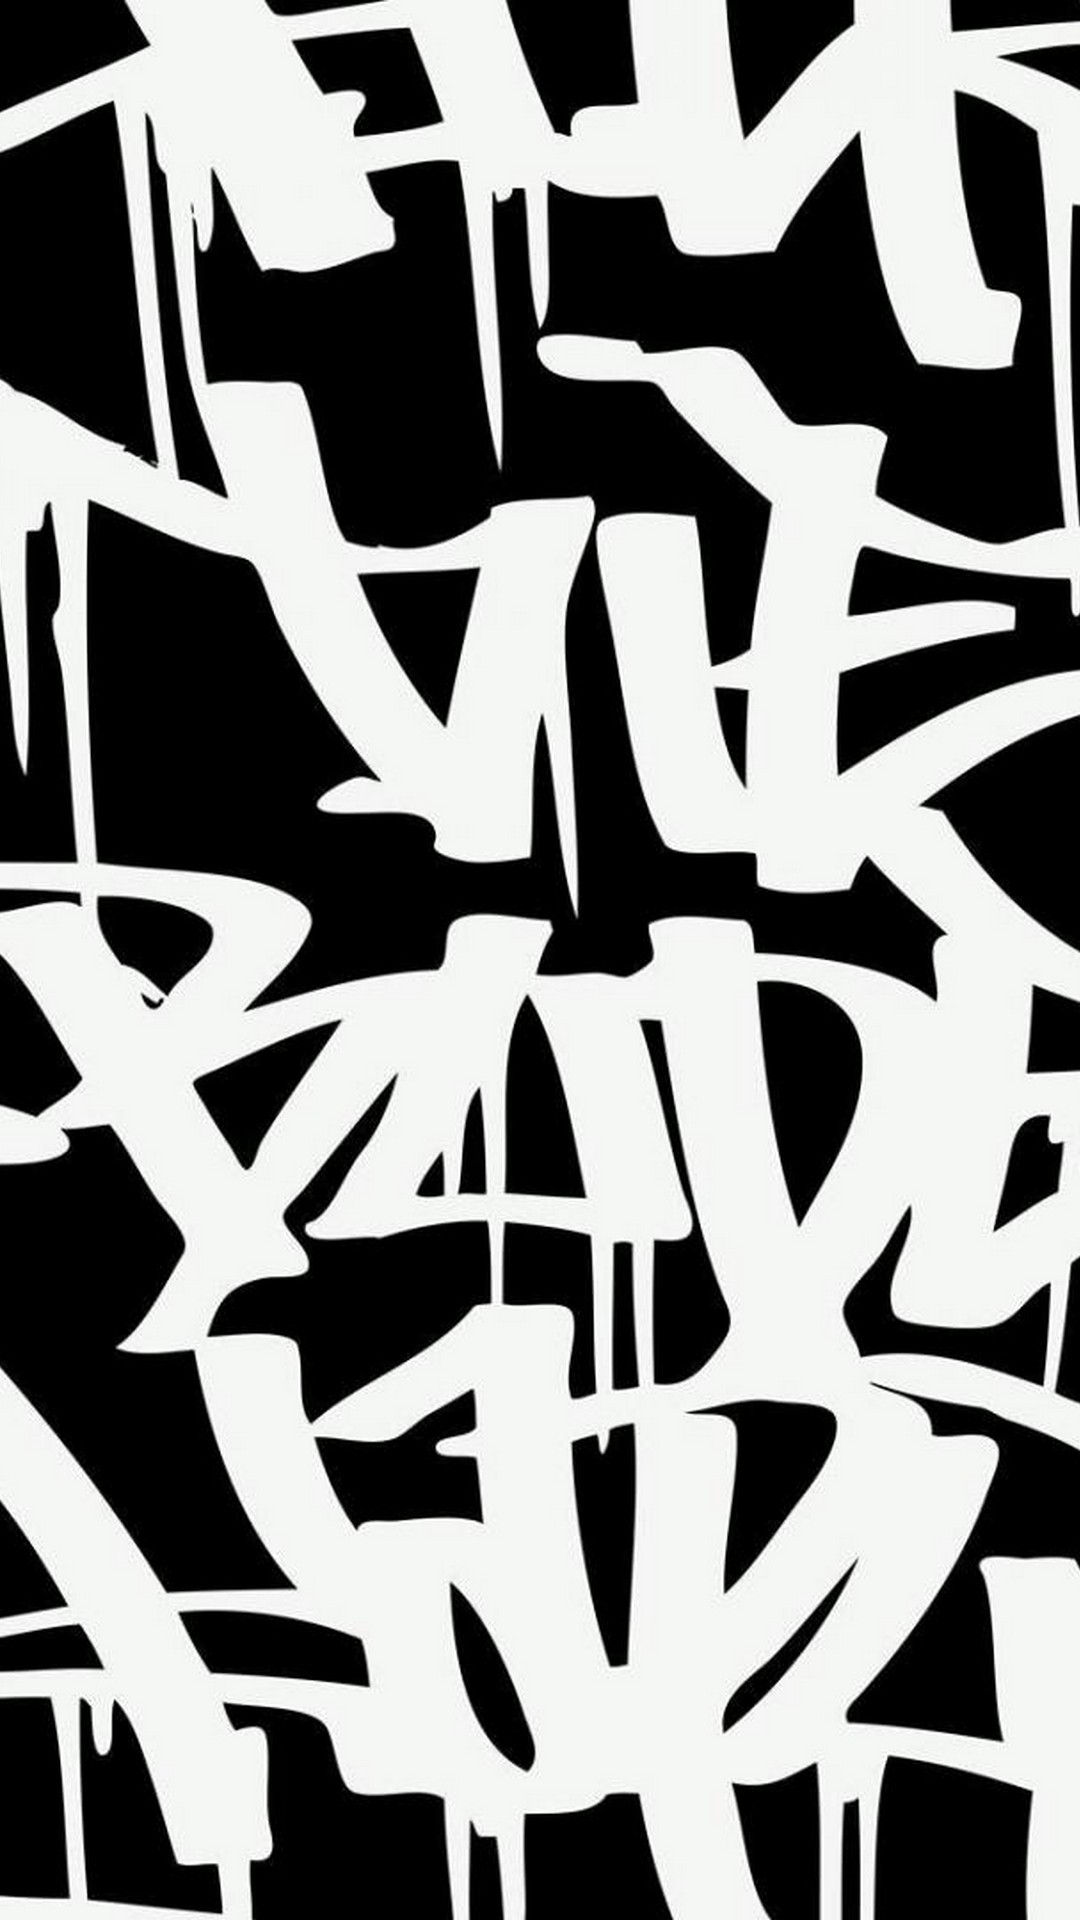 Wallpaper Graffiti Letters iPhone with resolution 1080X1920 pixel. You can make this wallpaper for your iPhone 5, 6, 7, 8, X backgrounds, Mobile Screensaver, or iPad Lock Screen